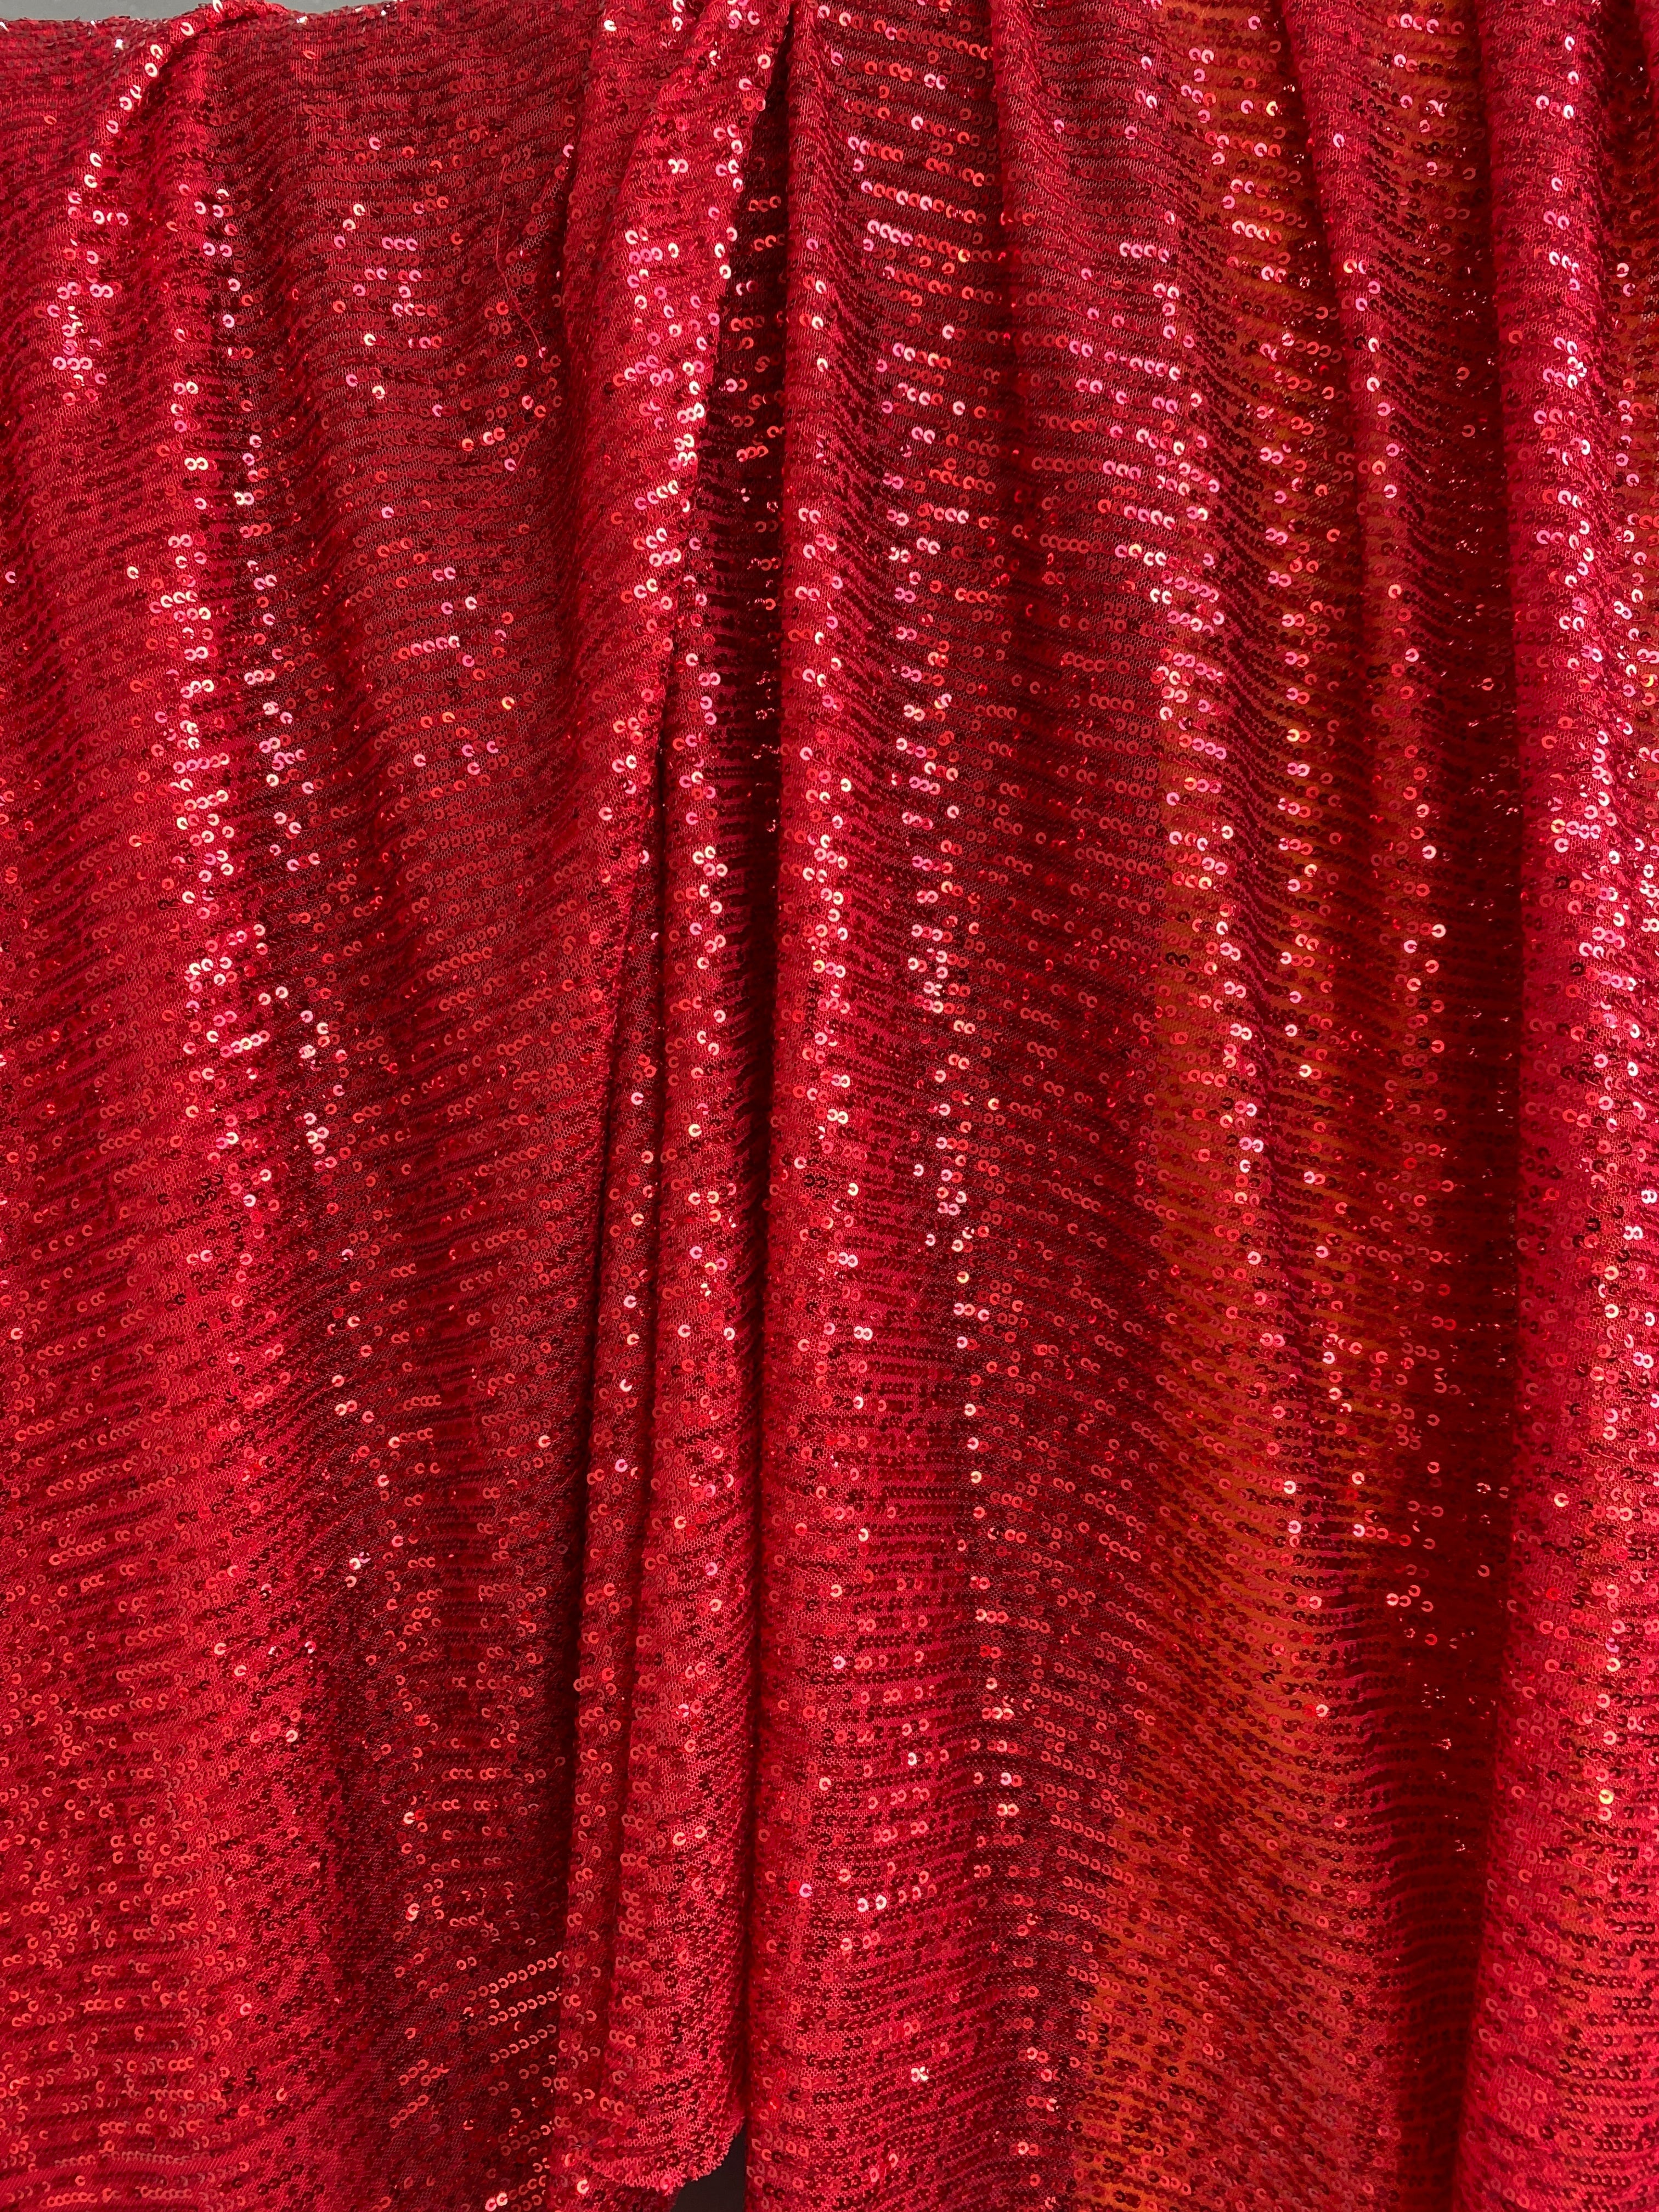 red Stretch Sequin Mesh, light red Stretch Sequin Mesh, dark red Stretch Sequin Mesh, Stretch Sequin Mesh for woman,  Stretch Sequin Mesh for bride, Stretch Sequin Mesh on sale, Stretch Sequin Mesh on discount, Stretch Sequin Mesh online